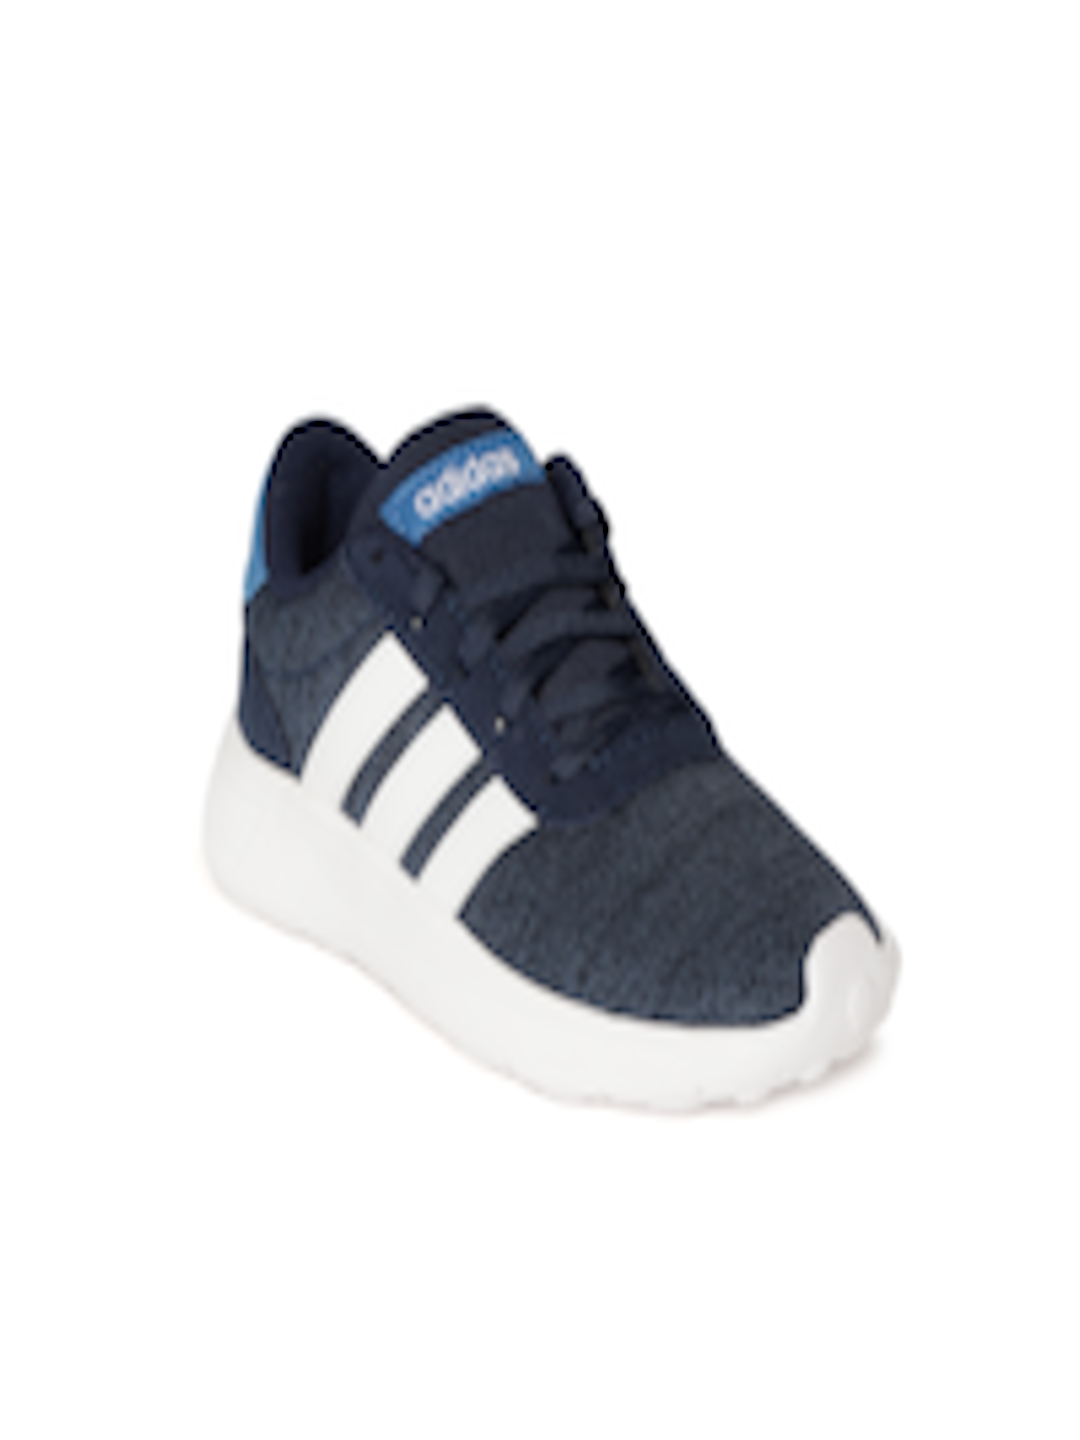 Buy ADIDAS Boys Navy Blue LITE RACER K Running Shoes - Sports Shoes for ...